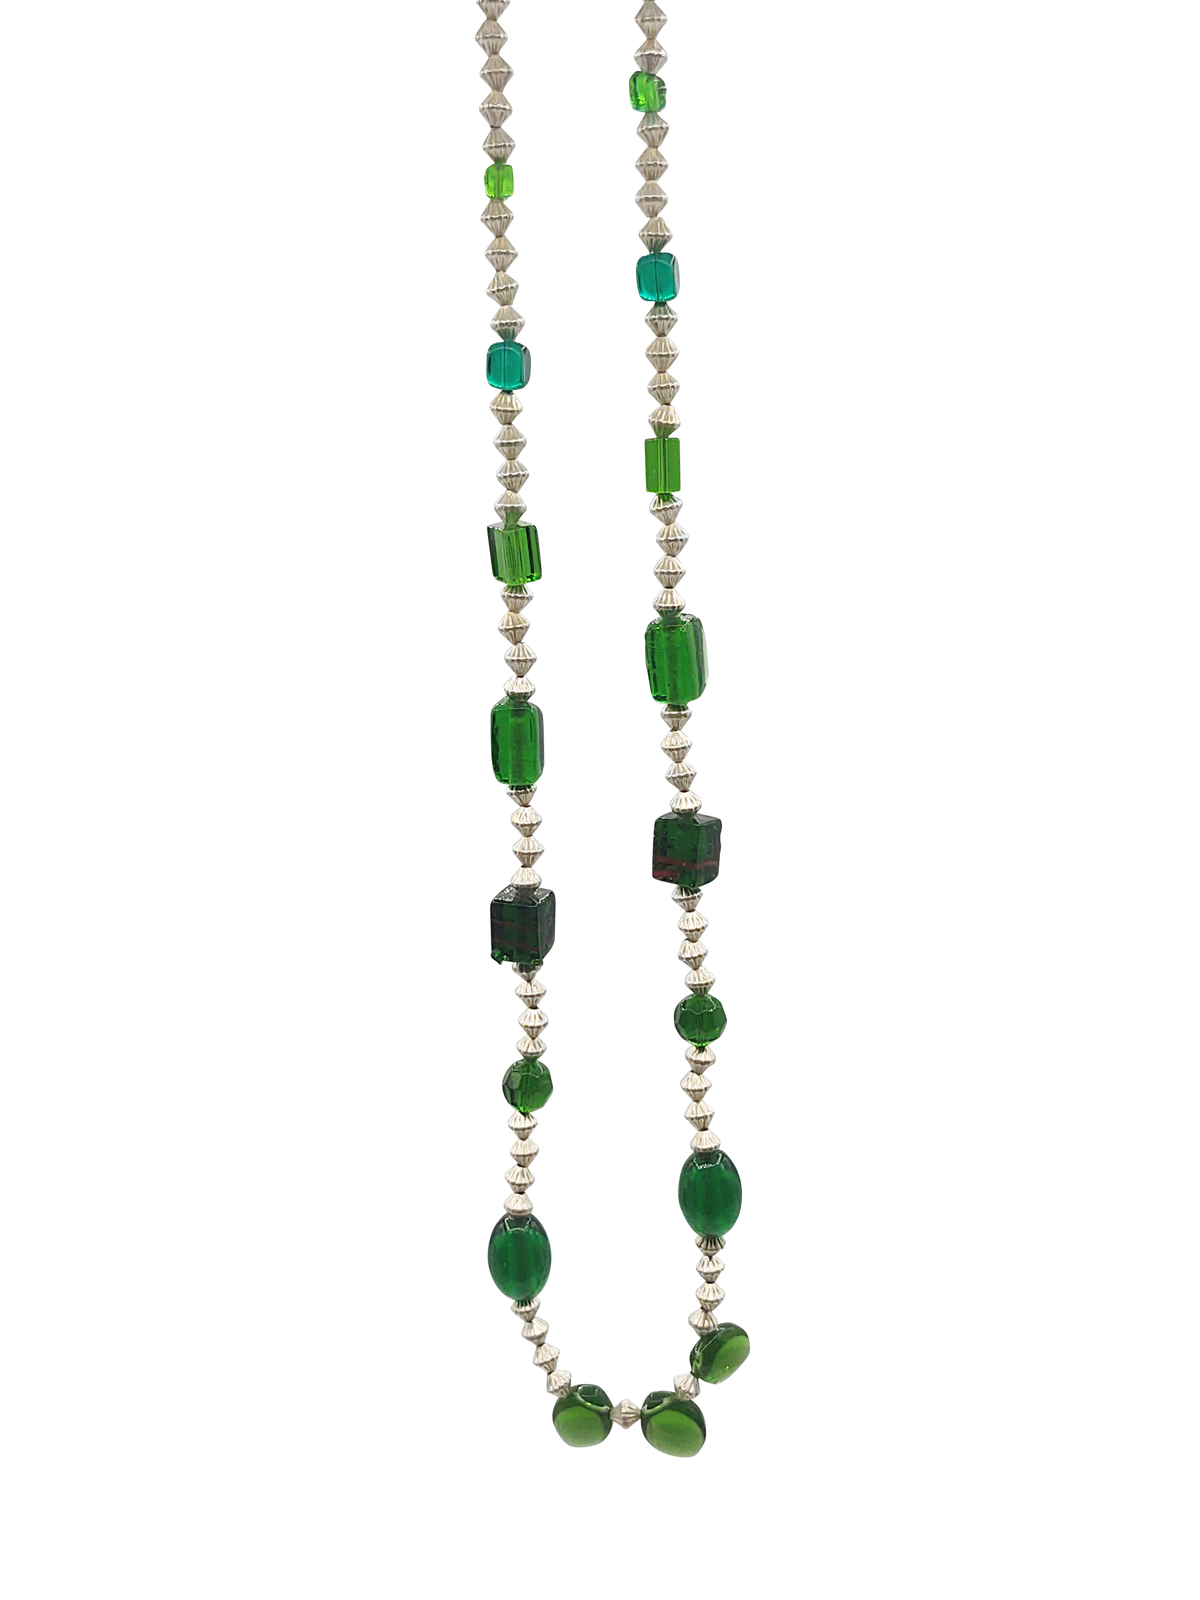 Emerald Green Glass Bead Necklace - White Bison Native Art